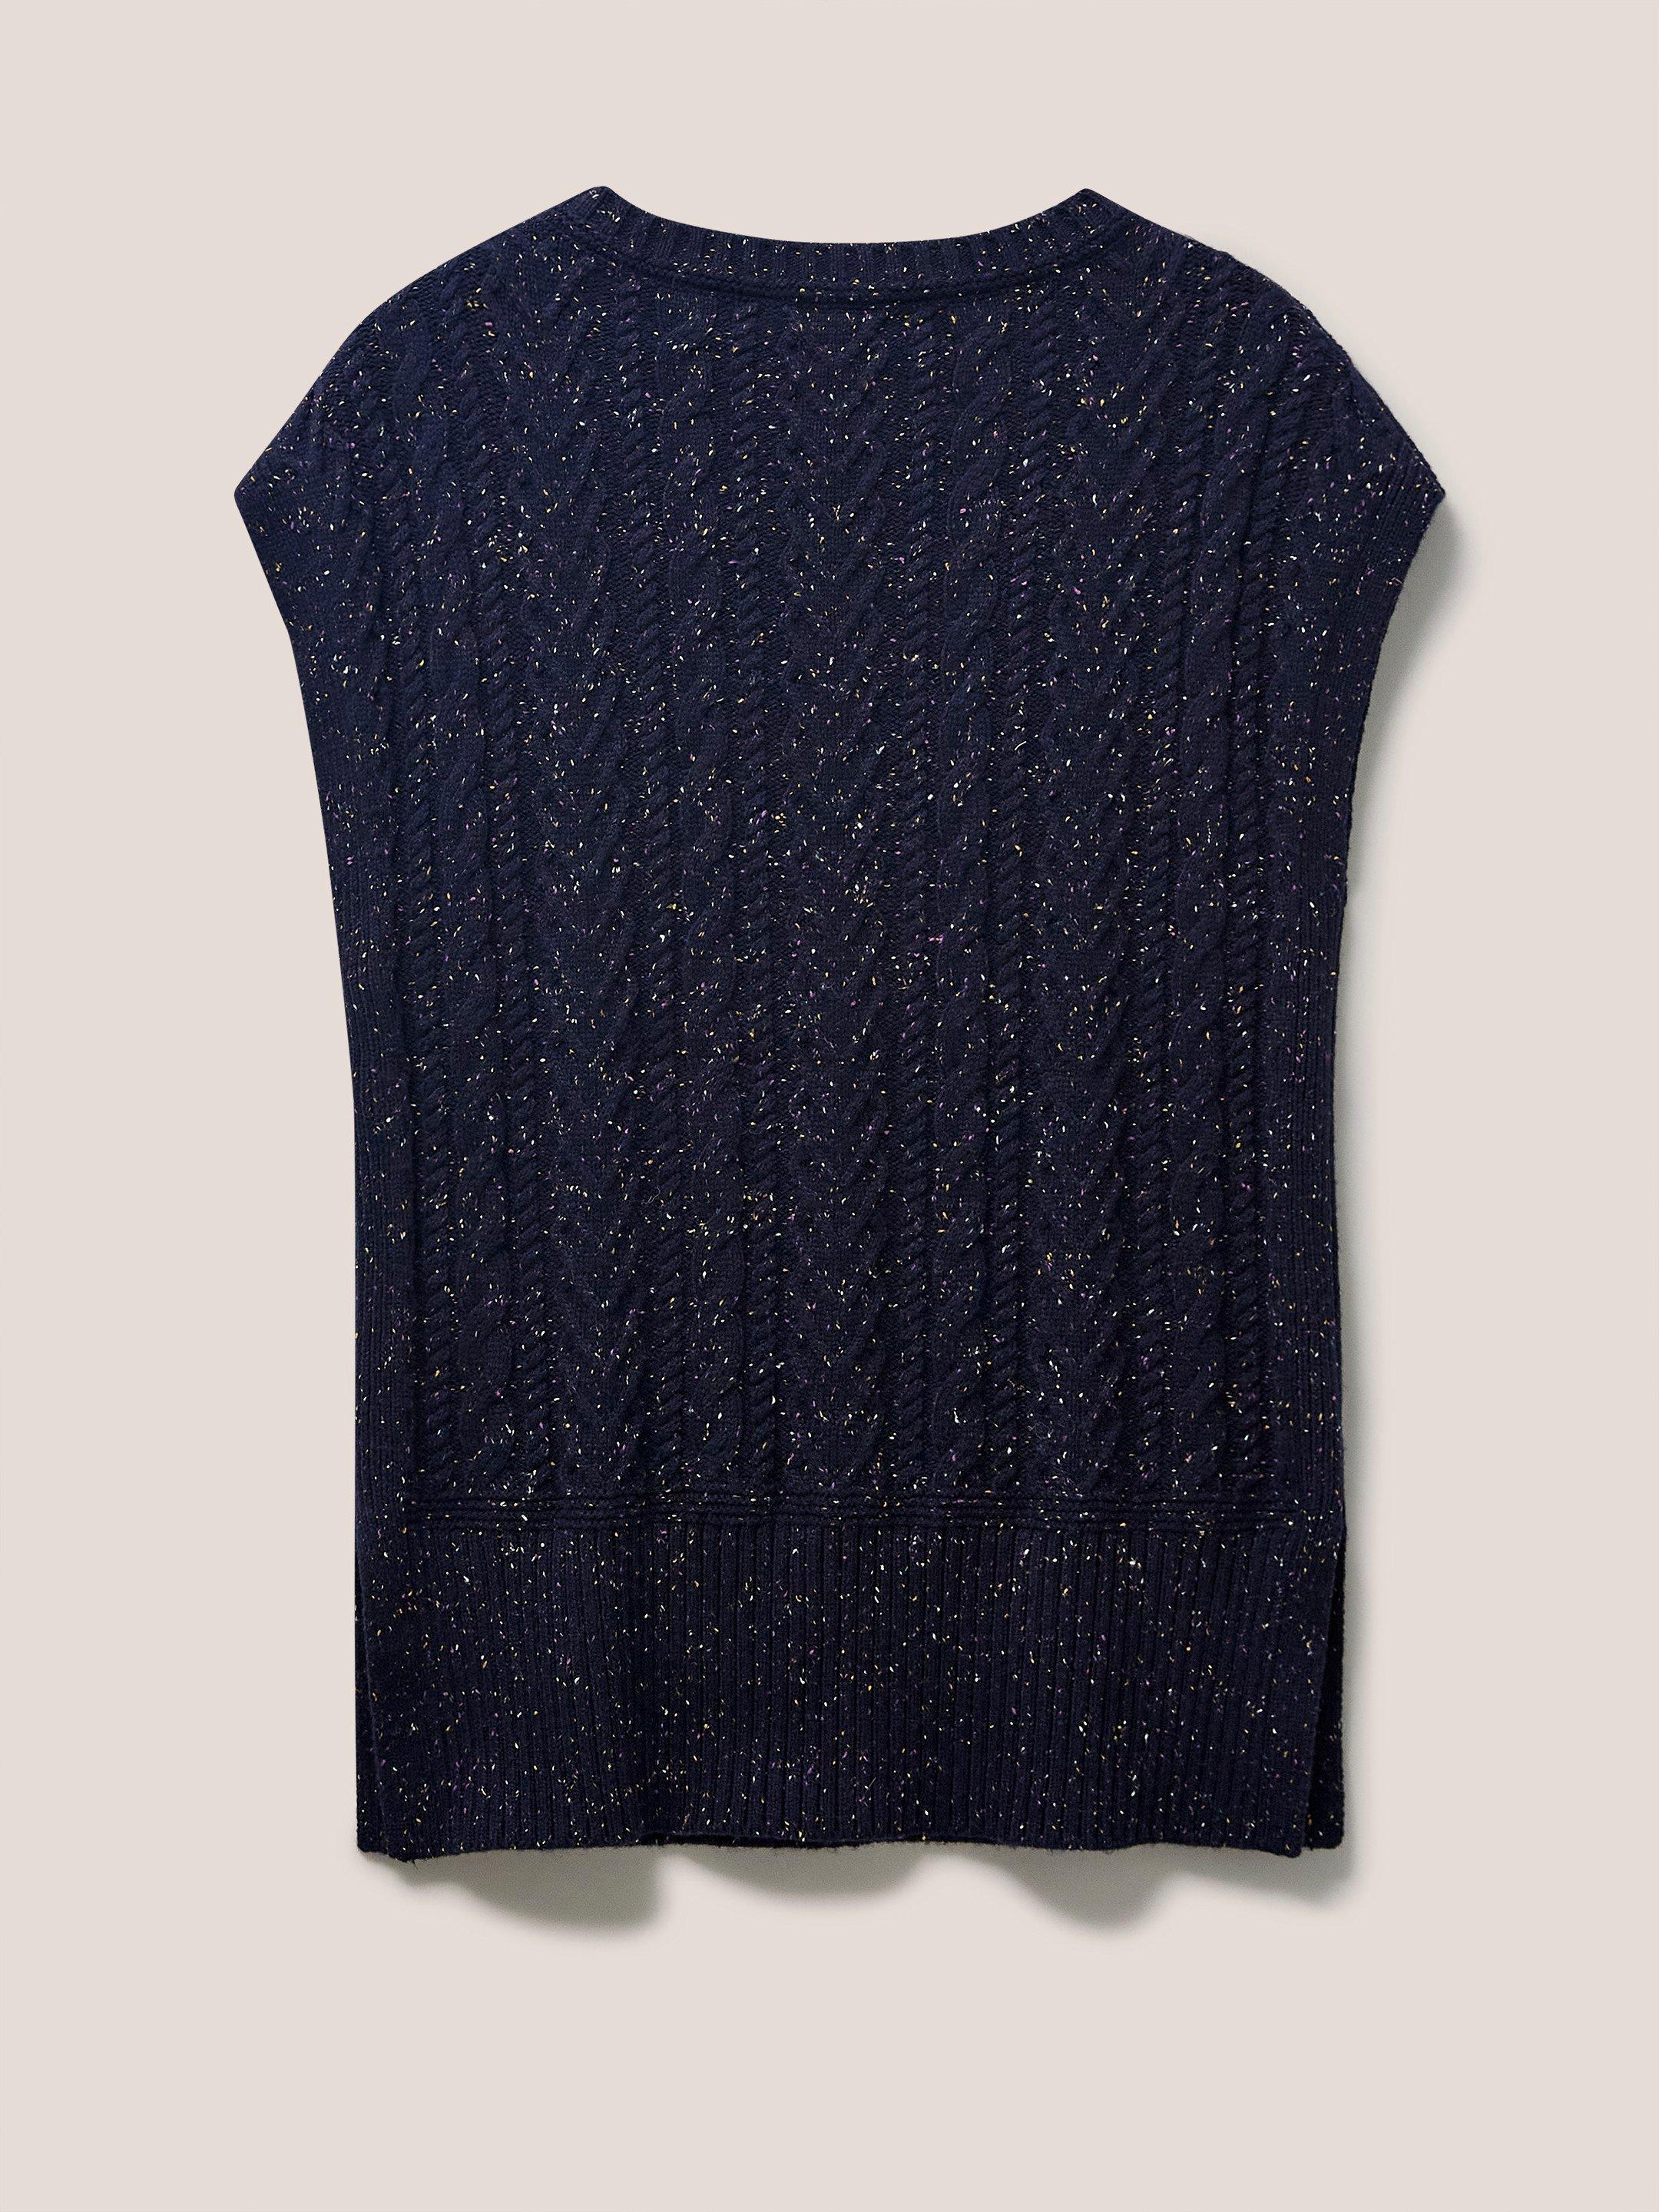 CABLE NEP TANK in DARK NAVY - FLAT BACK